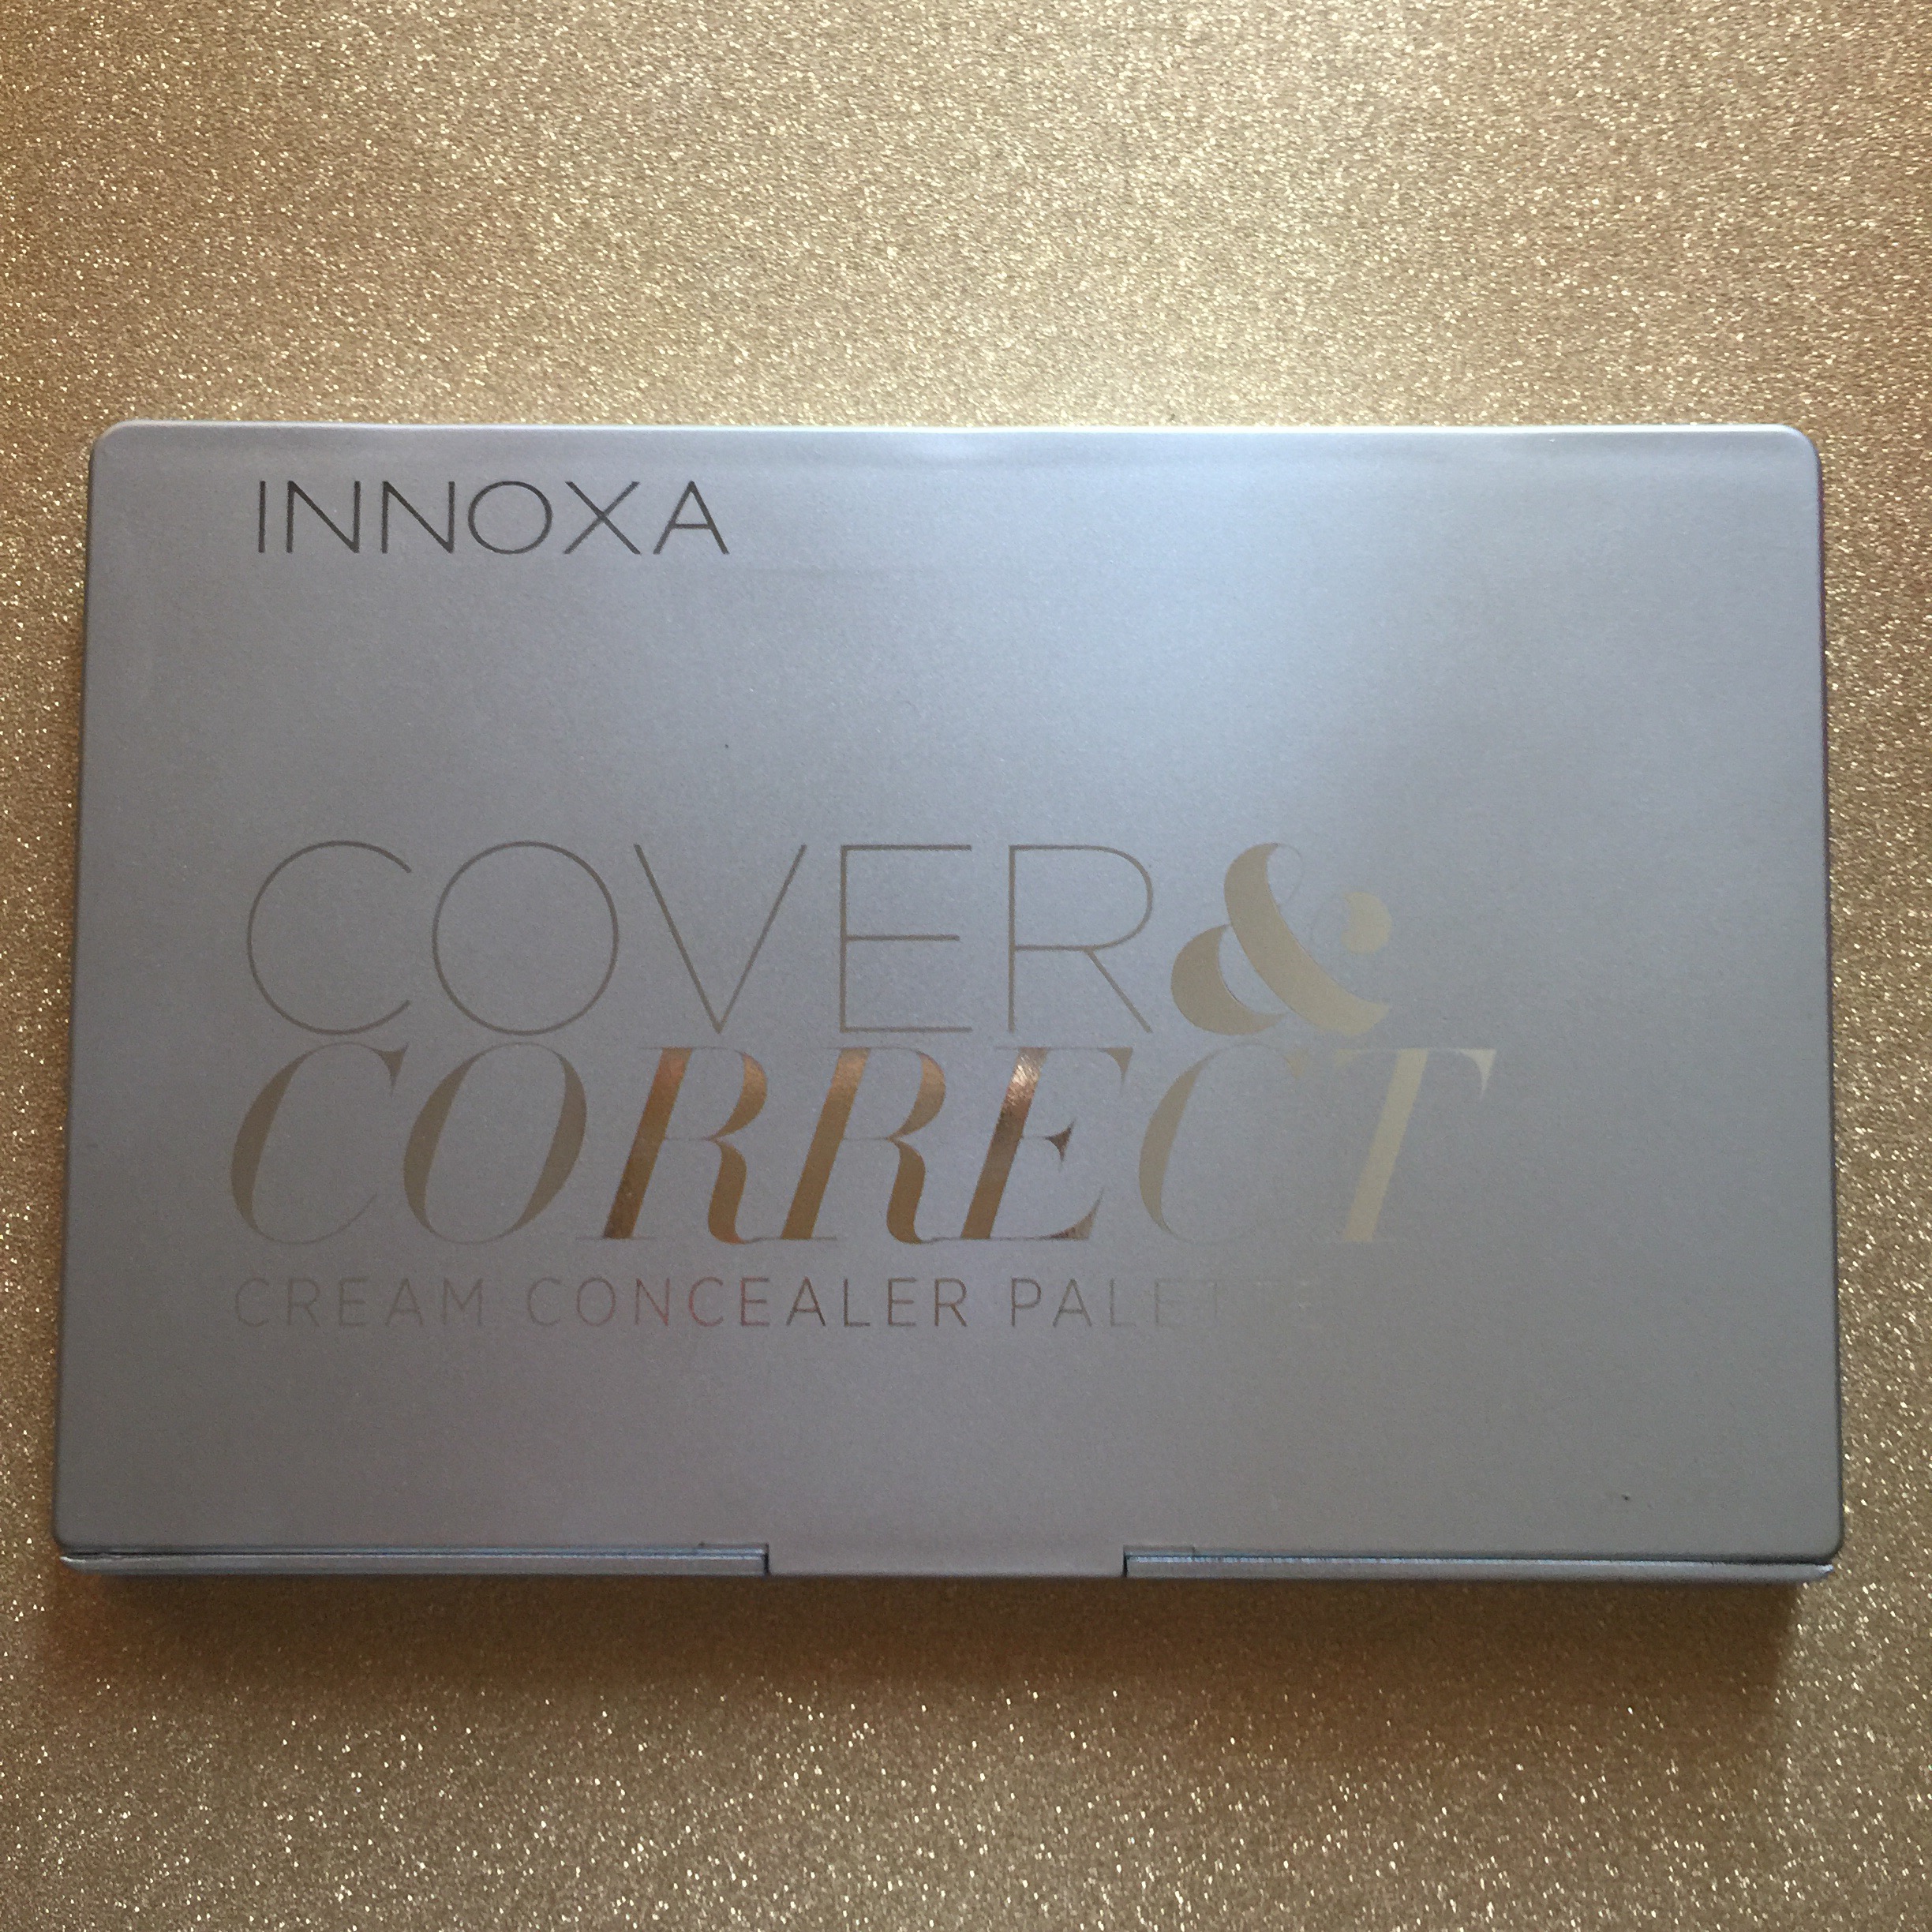 innoxa cover & correct cream concealer face palette review